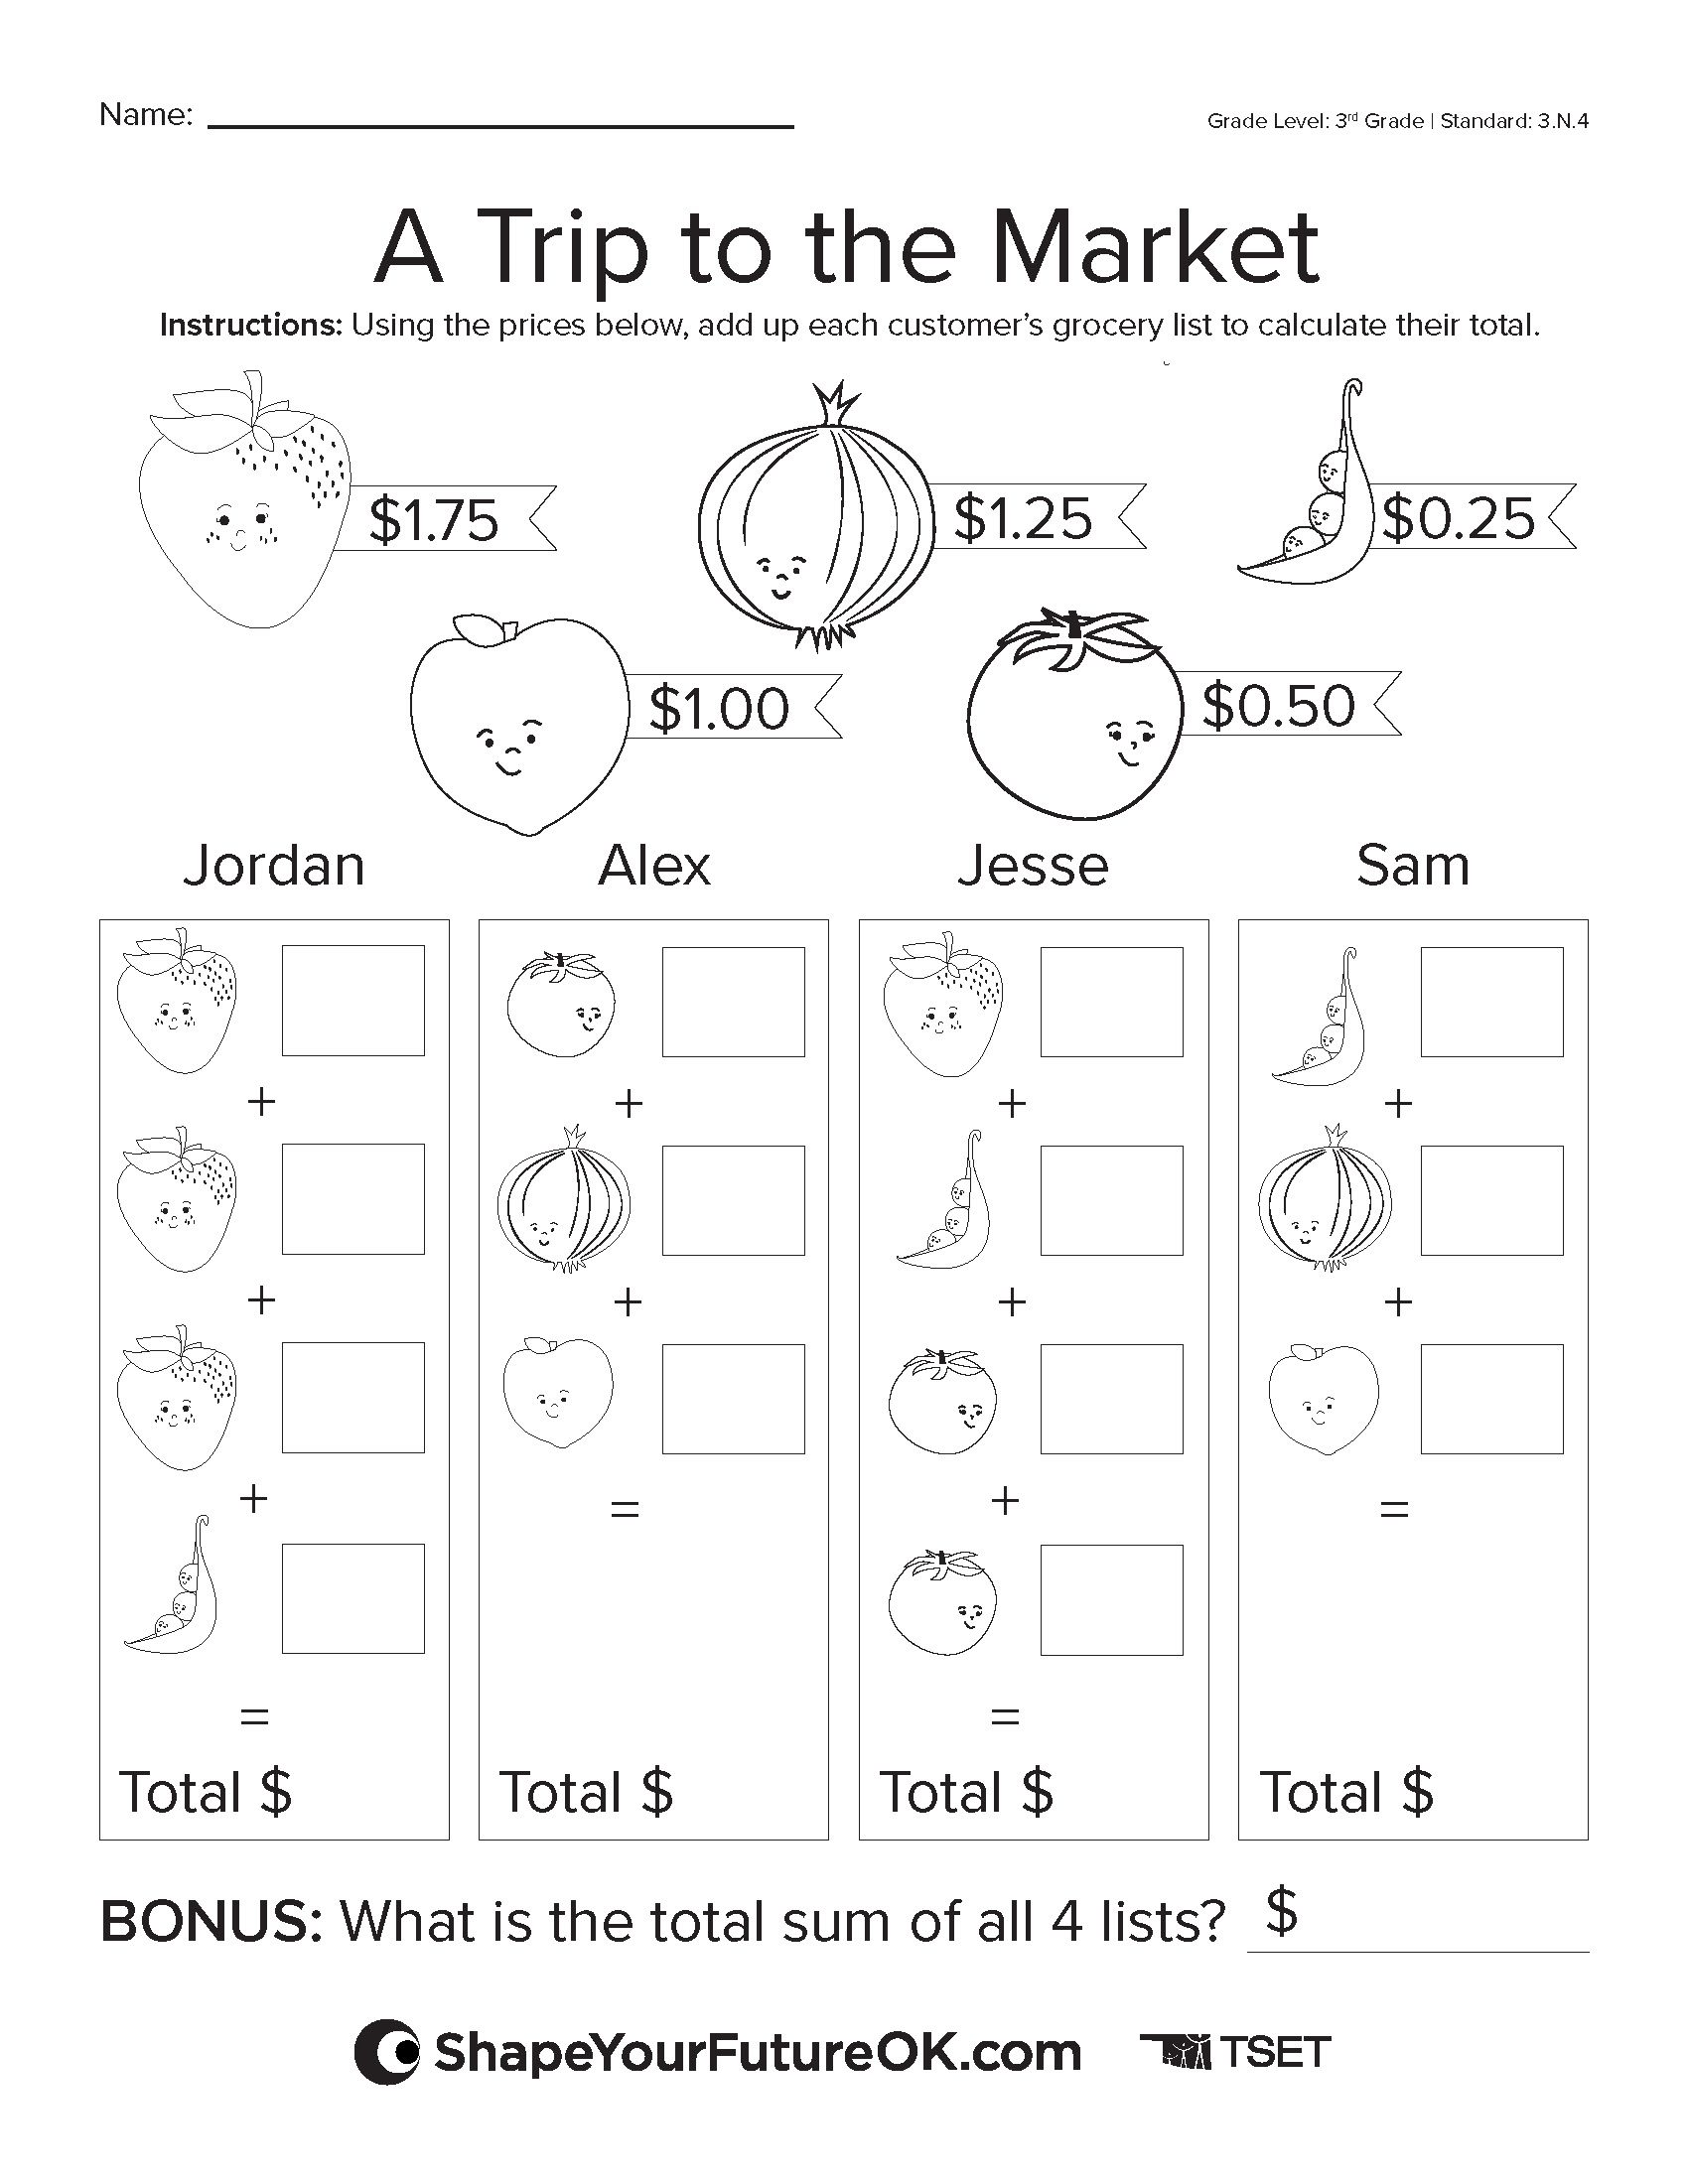 a trip to the market worksheet